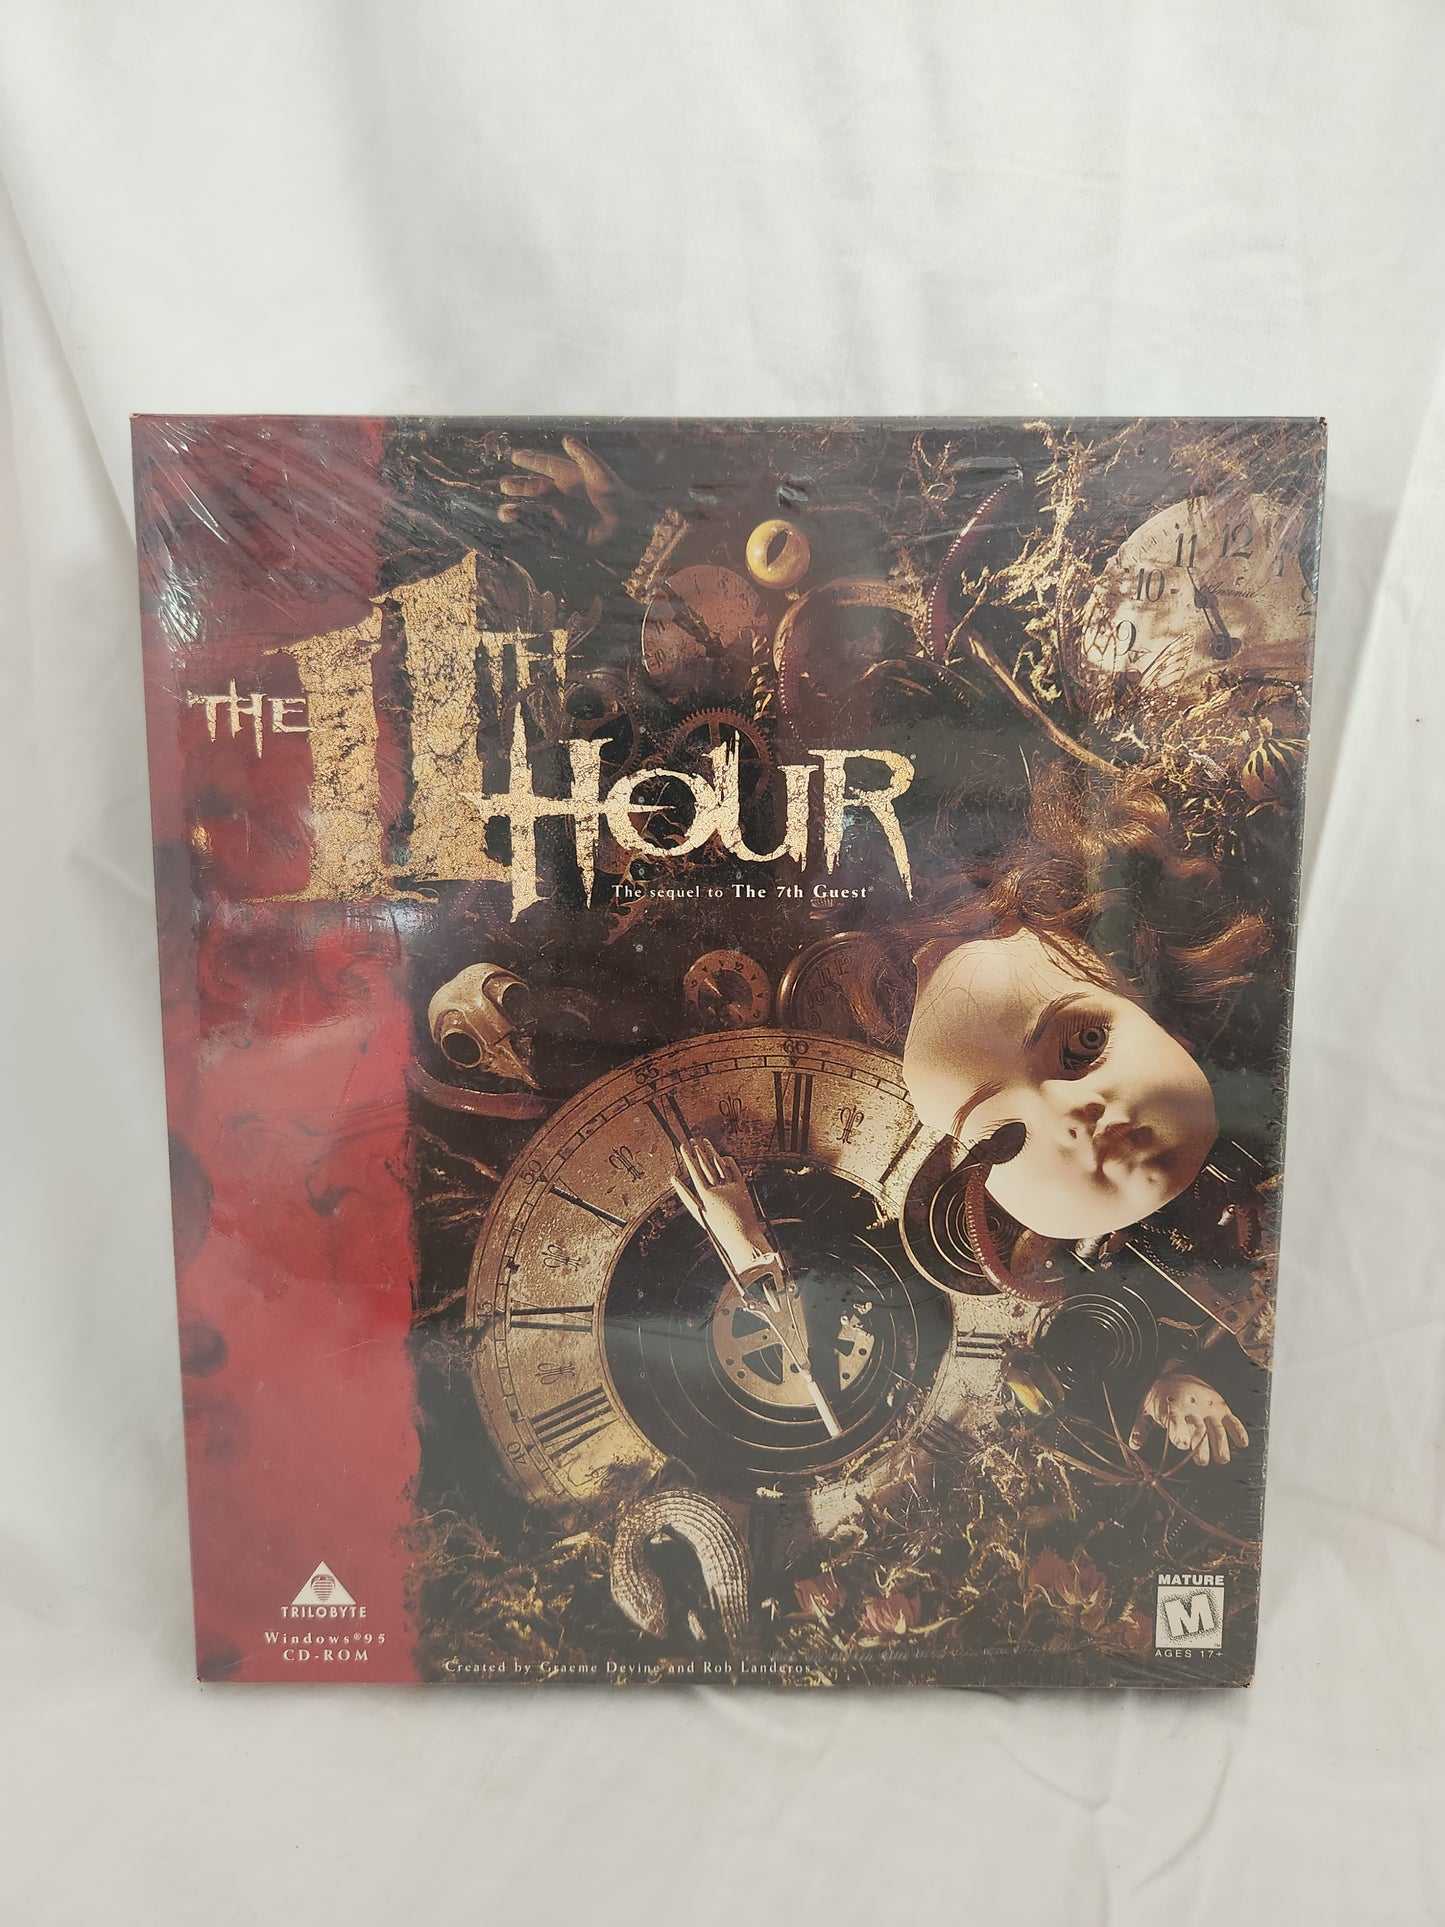 NIB - The 11th Hour Sequel to 7th Guest PC Game by Trilobyte